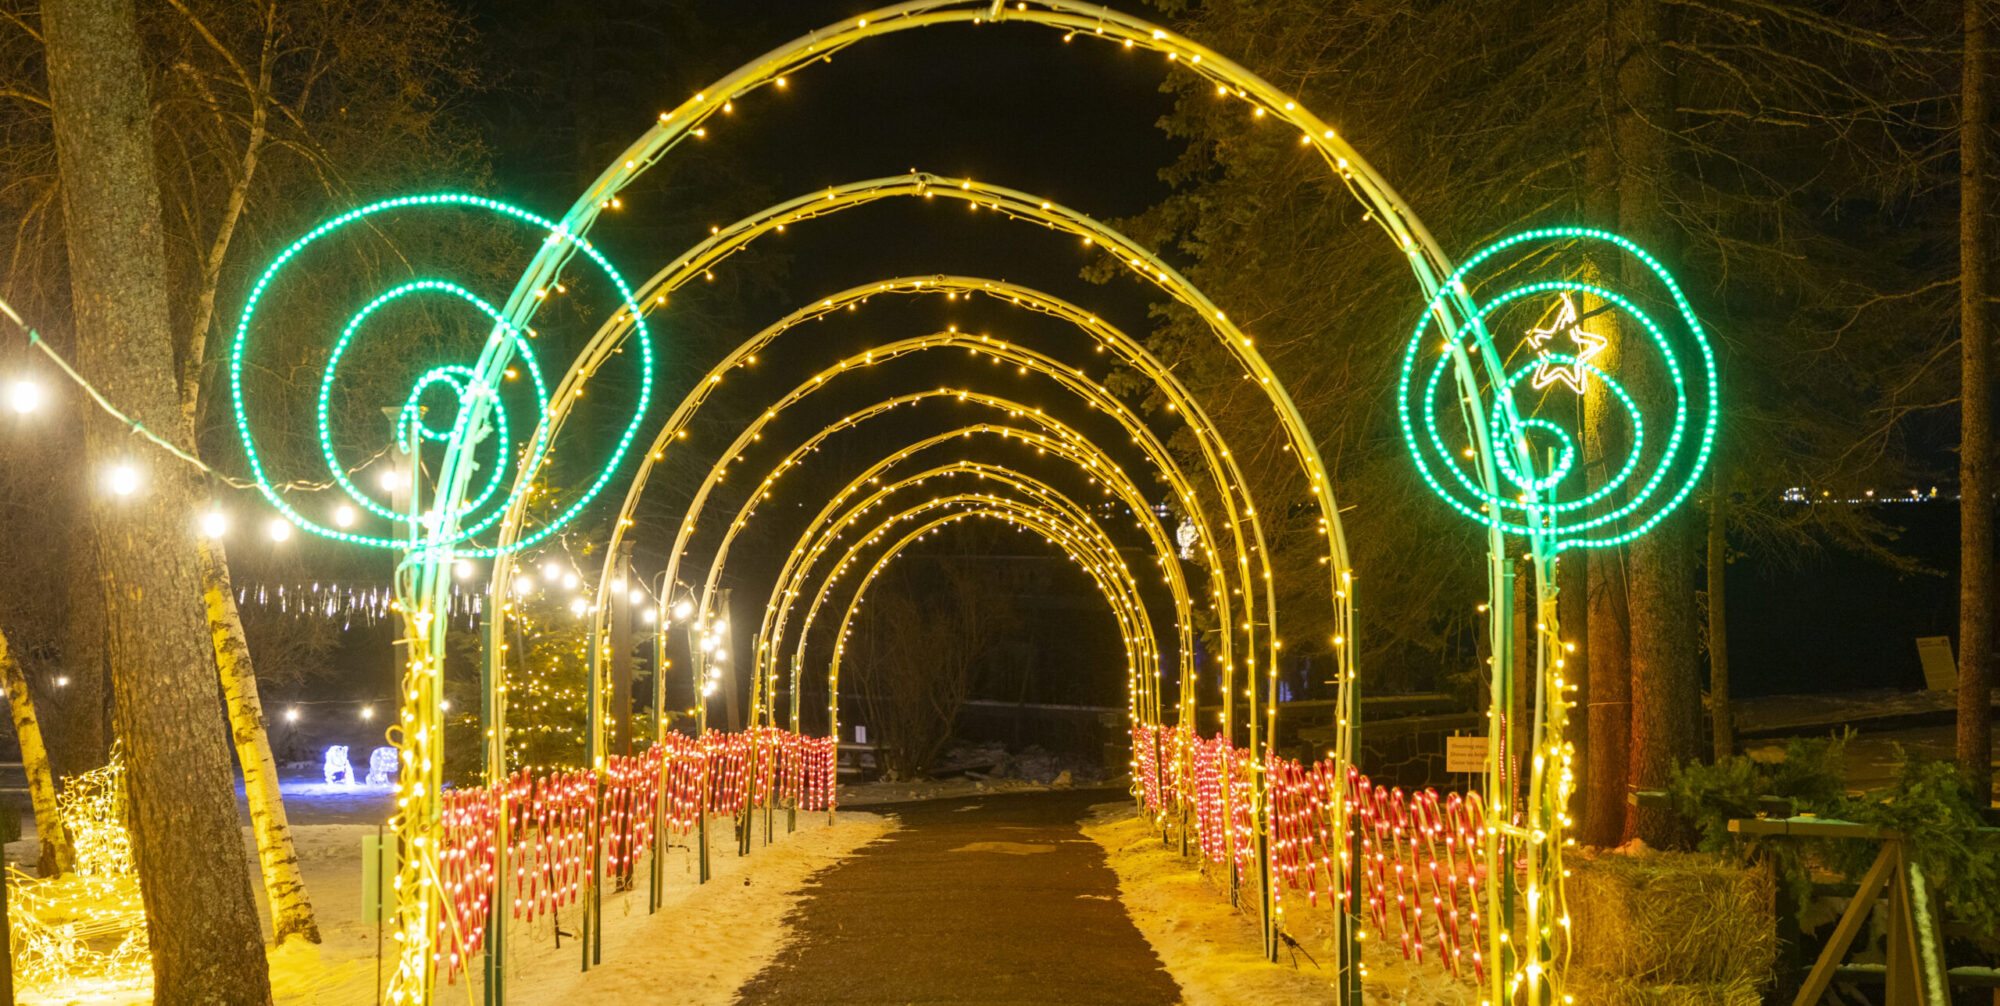 A tunnel of white and green lights surrounds a walkway outdoors with candy canes lining either side of the path.